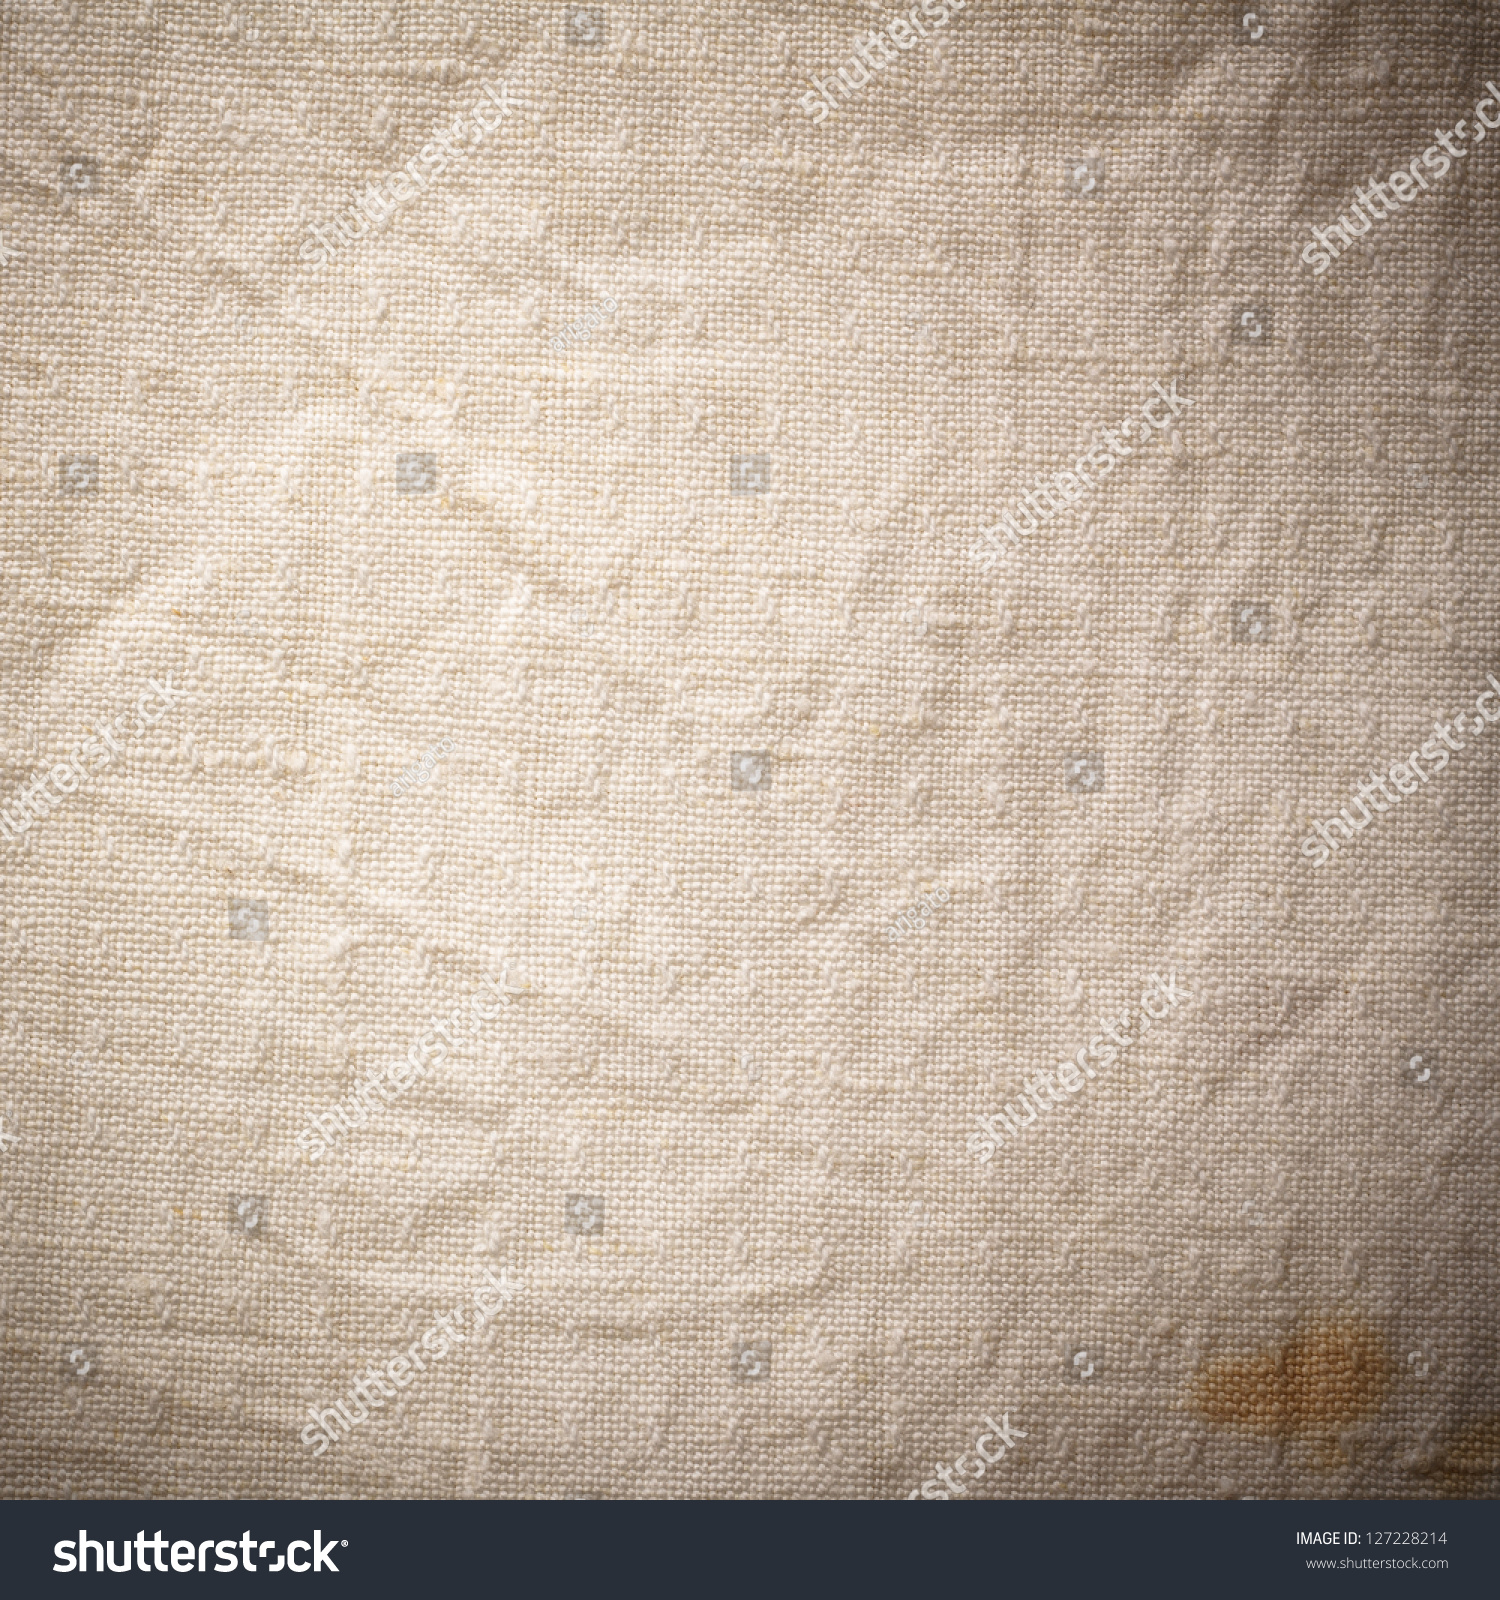 Dirty Fabric Texture Background Stock Photo 127228214 - Shutterstock